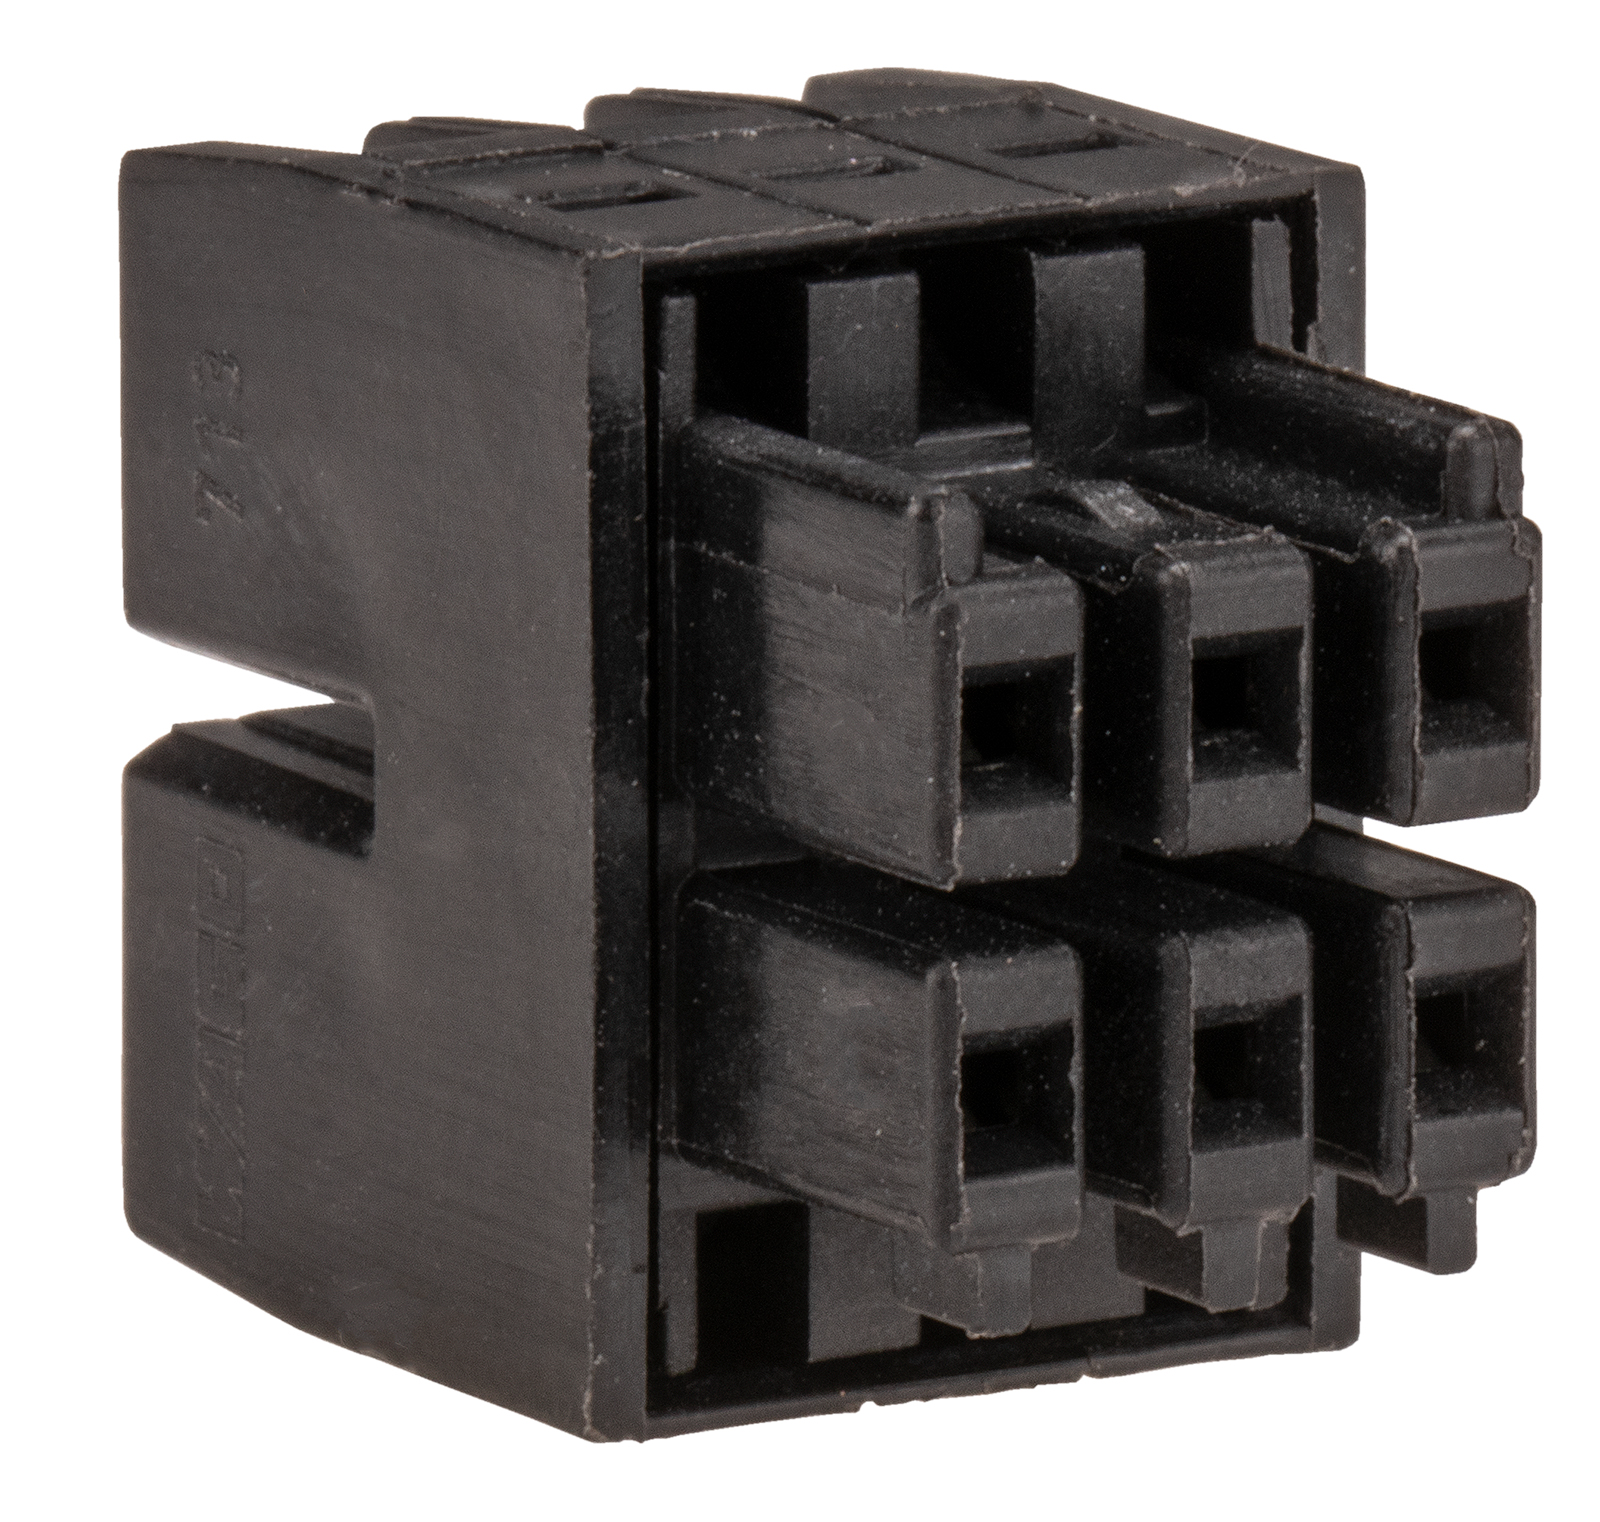 System connector X2 for eco-CONTROL EC200 2.0